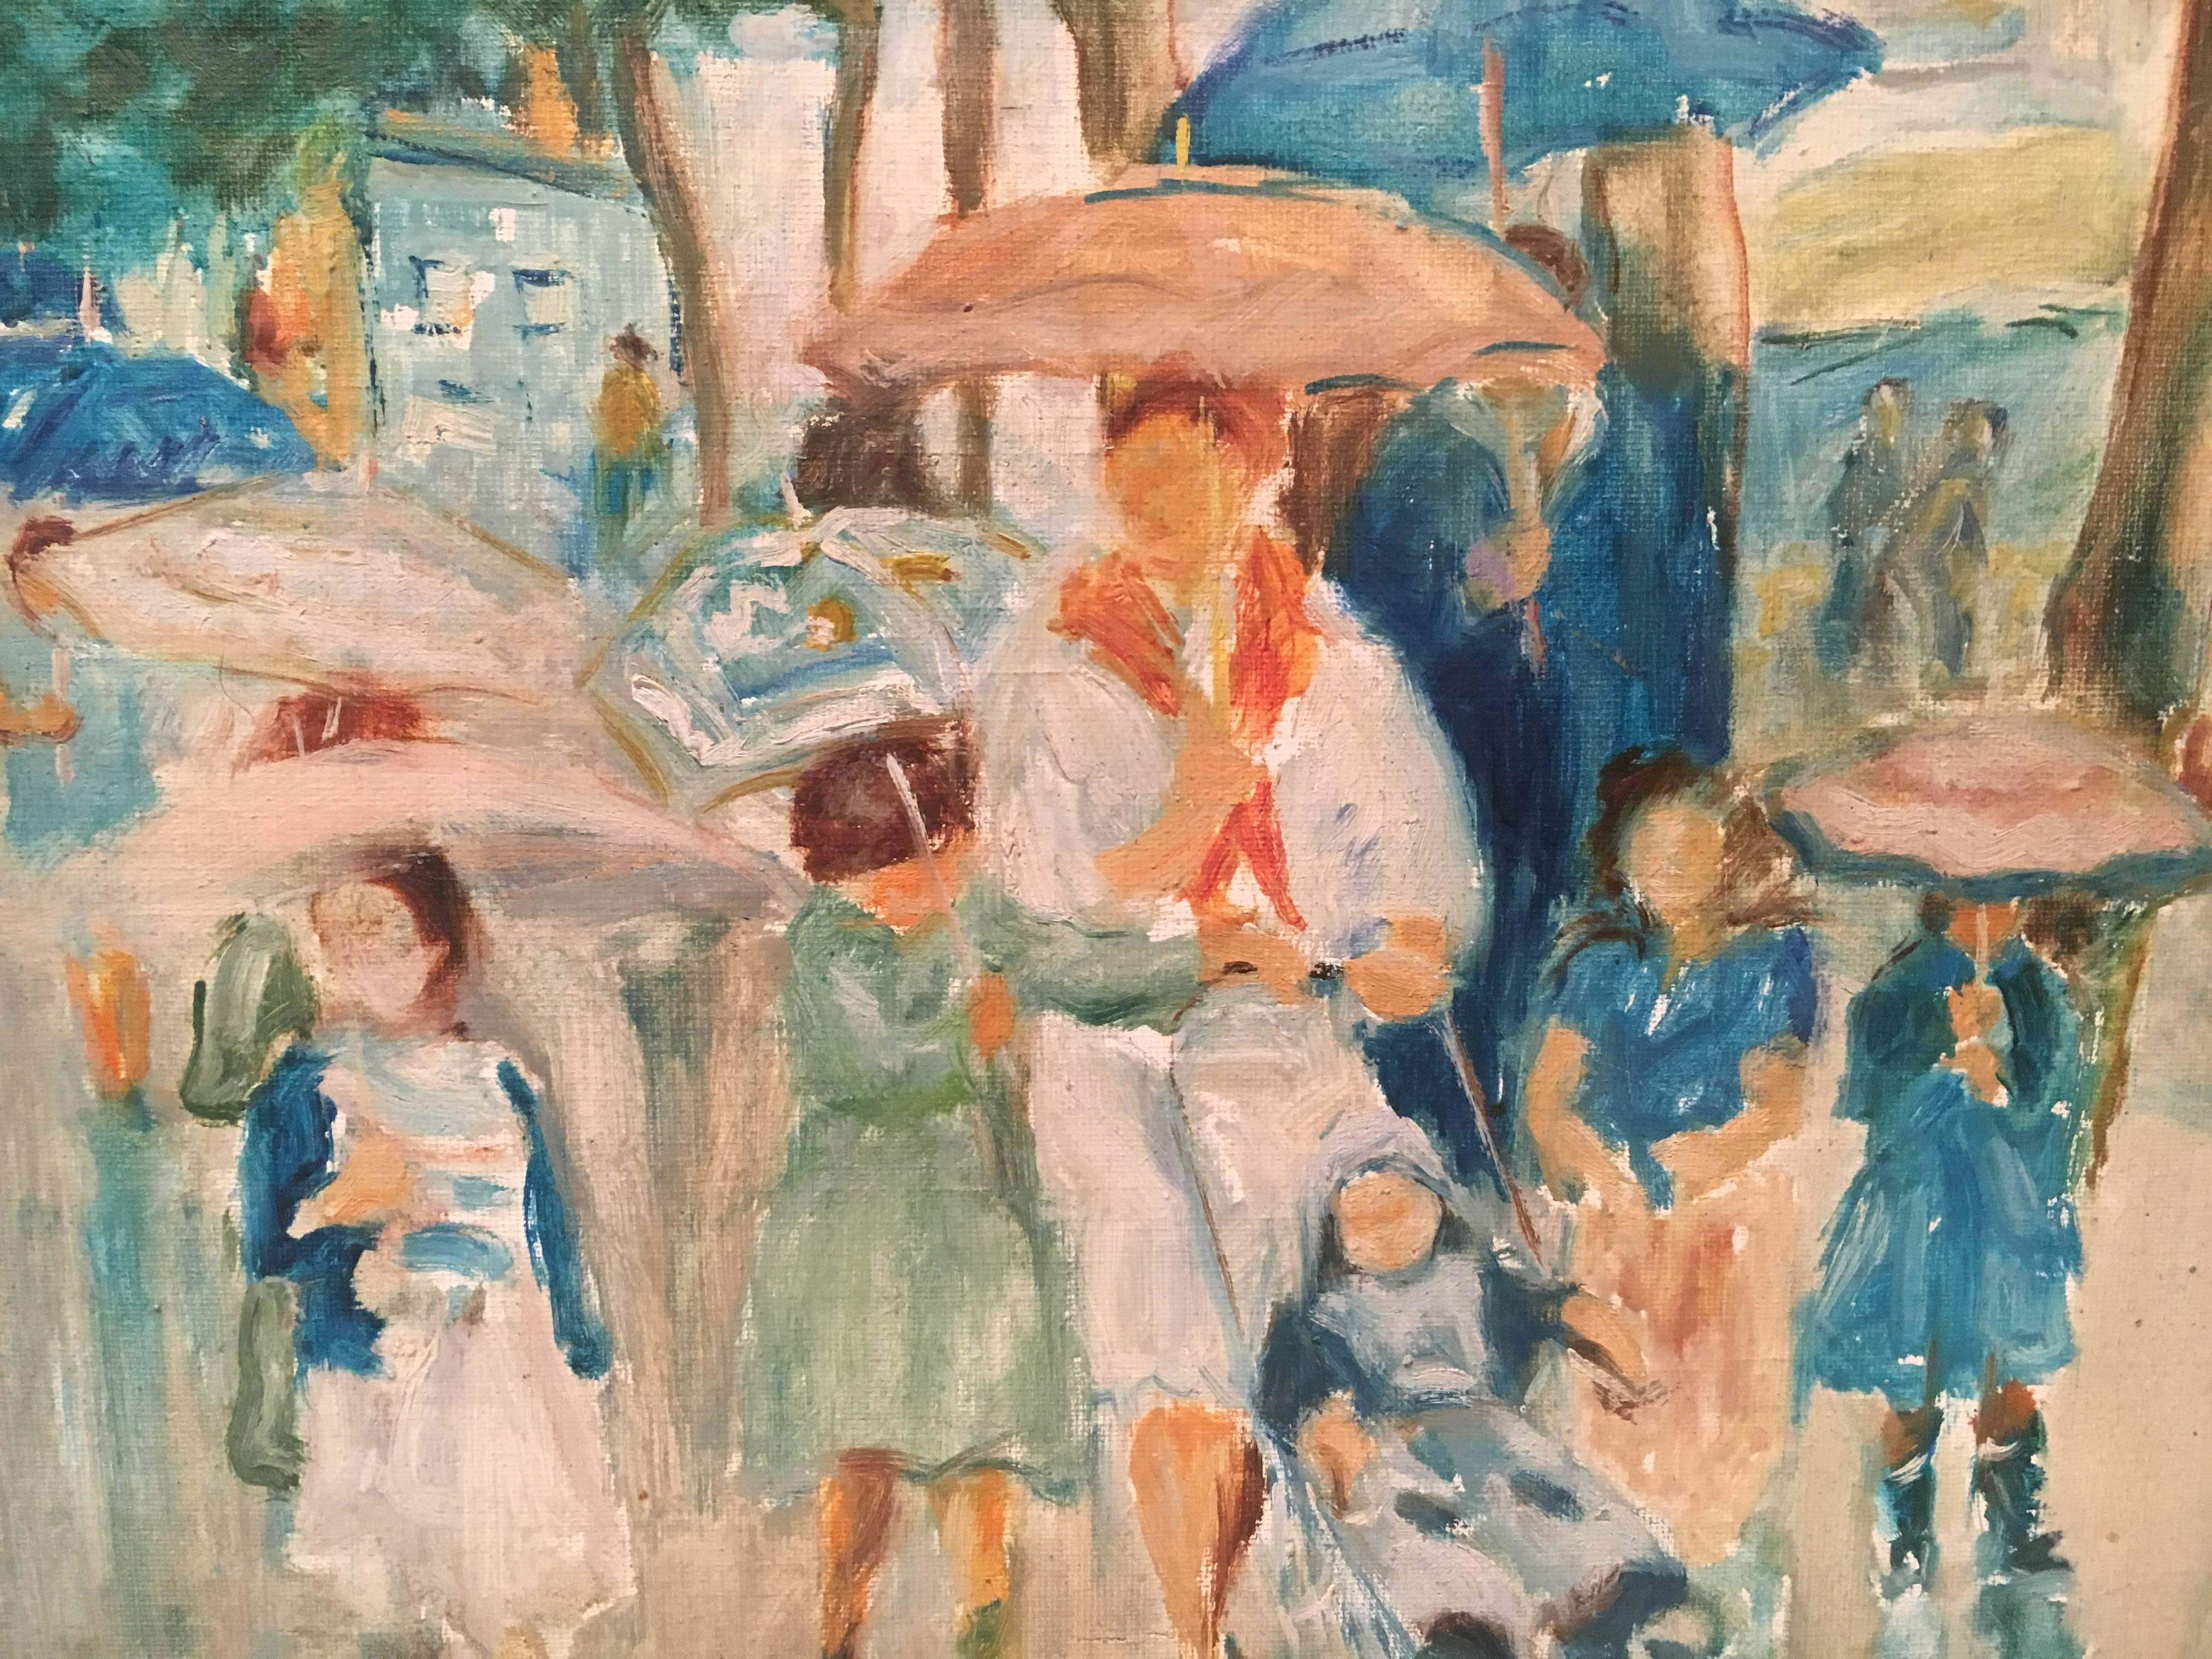 Charming impressionist oil on board of a woman and children in the rain. Lovely use of subtle colors and painterly technique, signed 